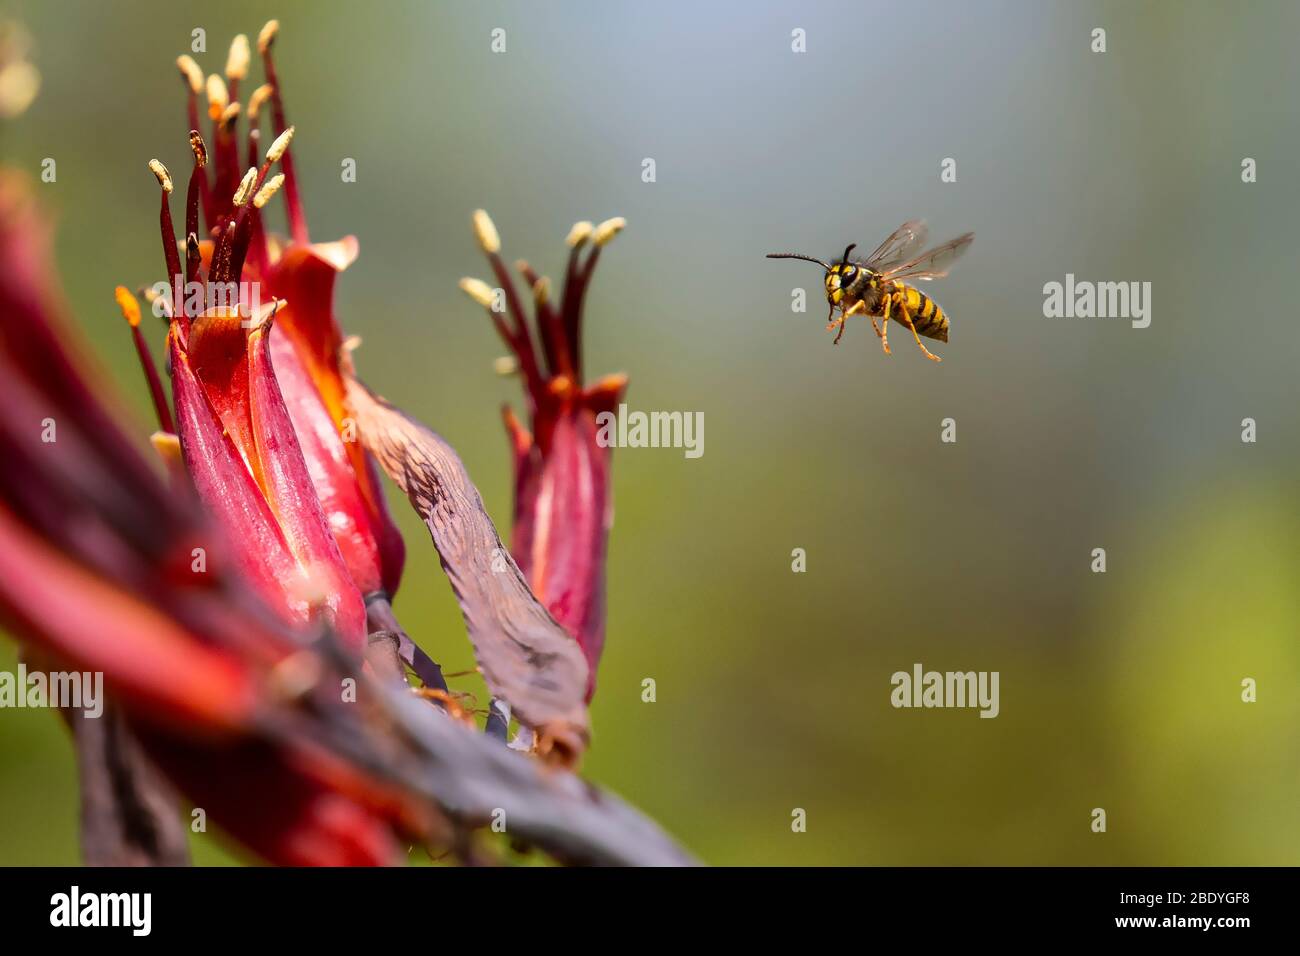 Hi seed photo of a Wasp in flight Stock Photo